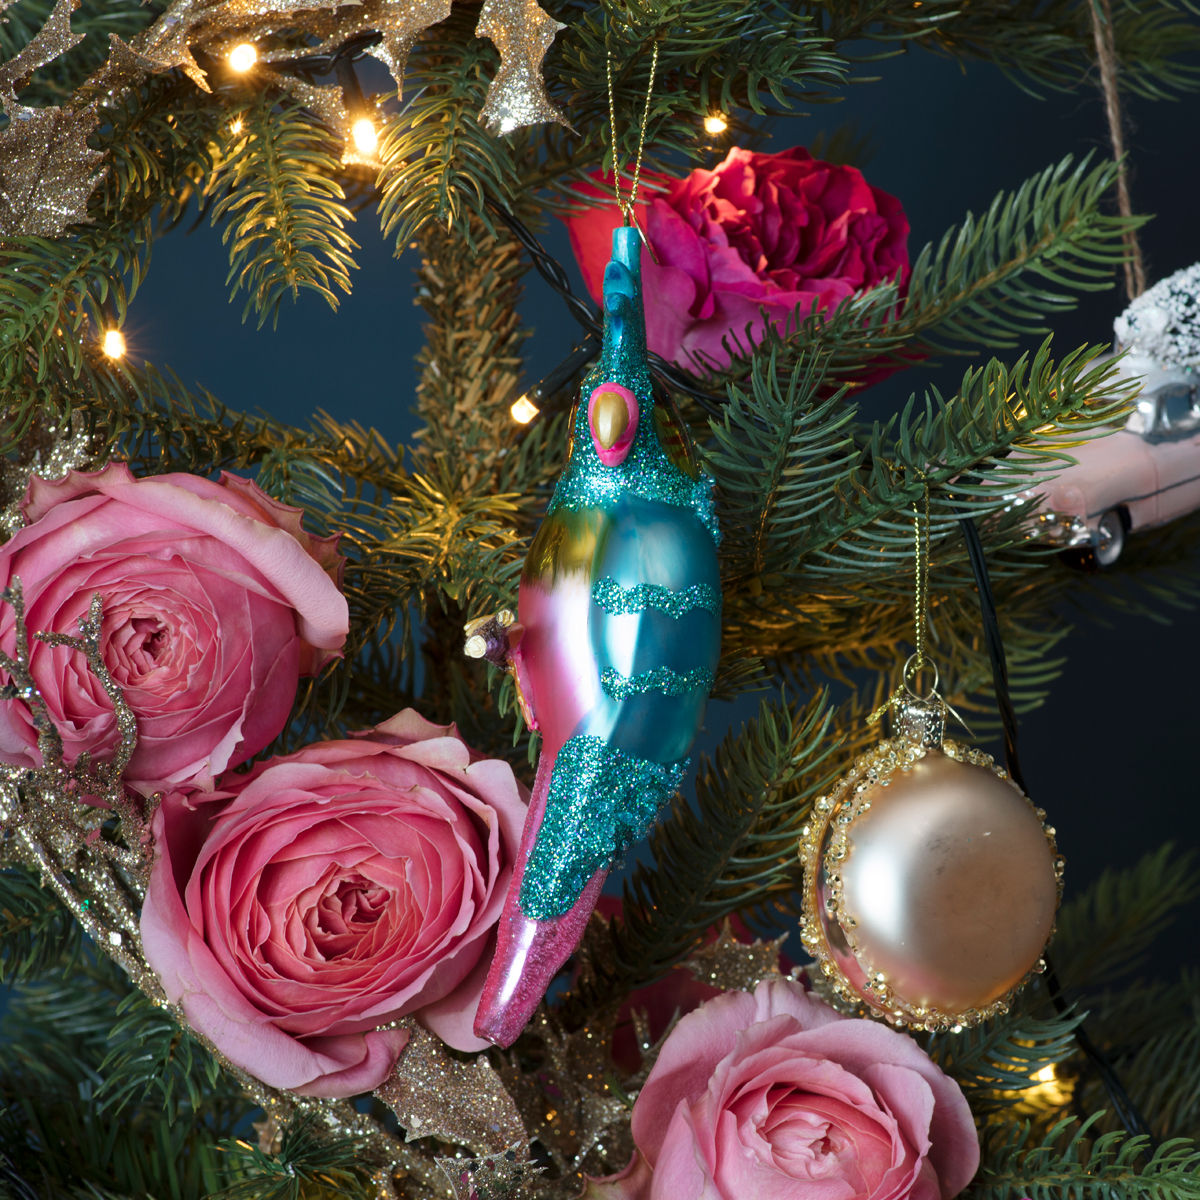 Macaroons, parrots and real pink roses on the Christmas tree